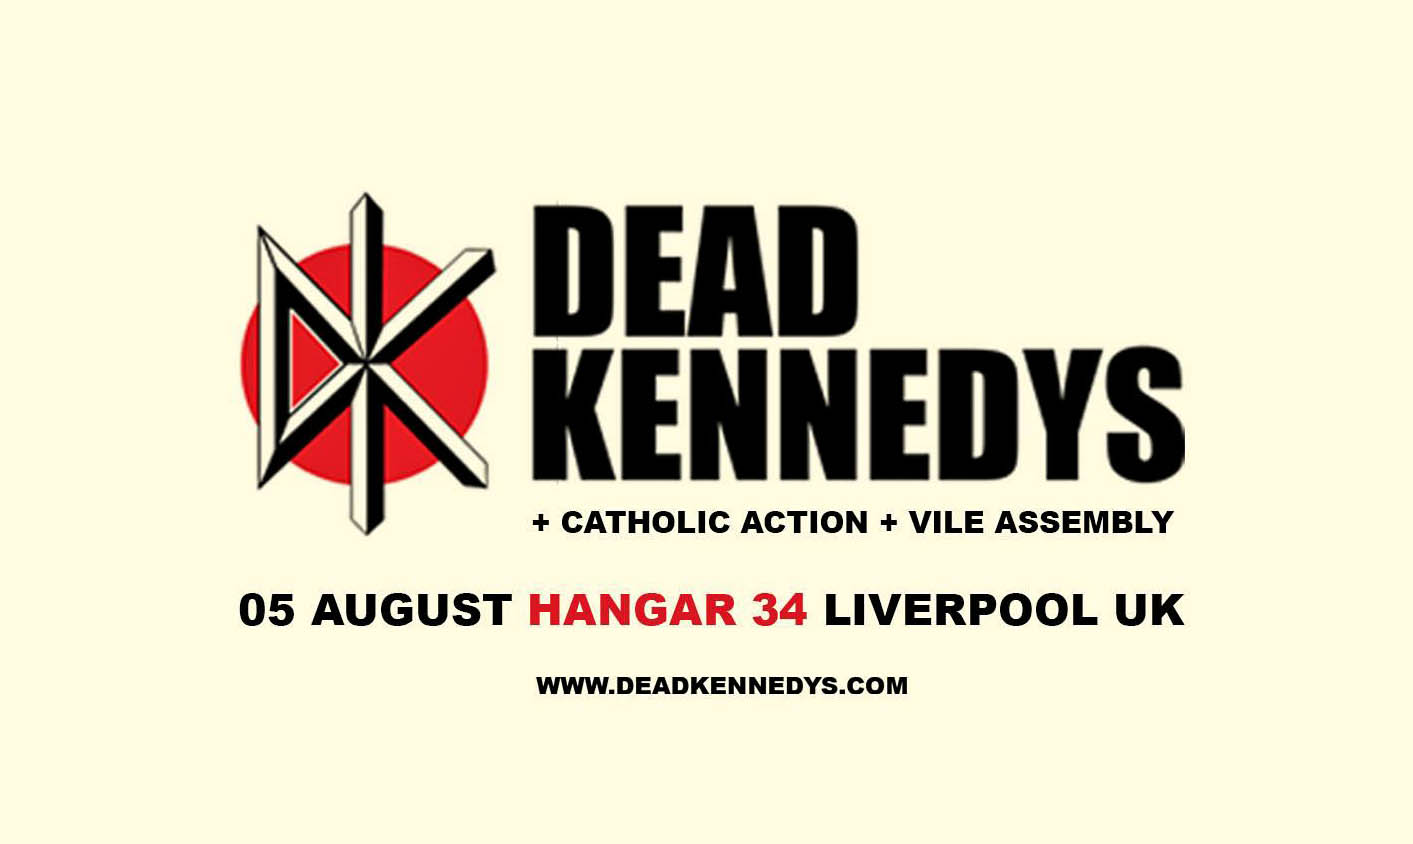  Dead Kennedys + Catholic Action + Vile Assembly – next month @ Hangar34